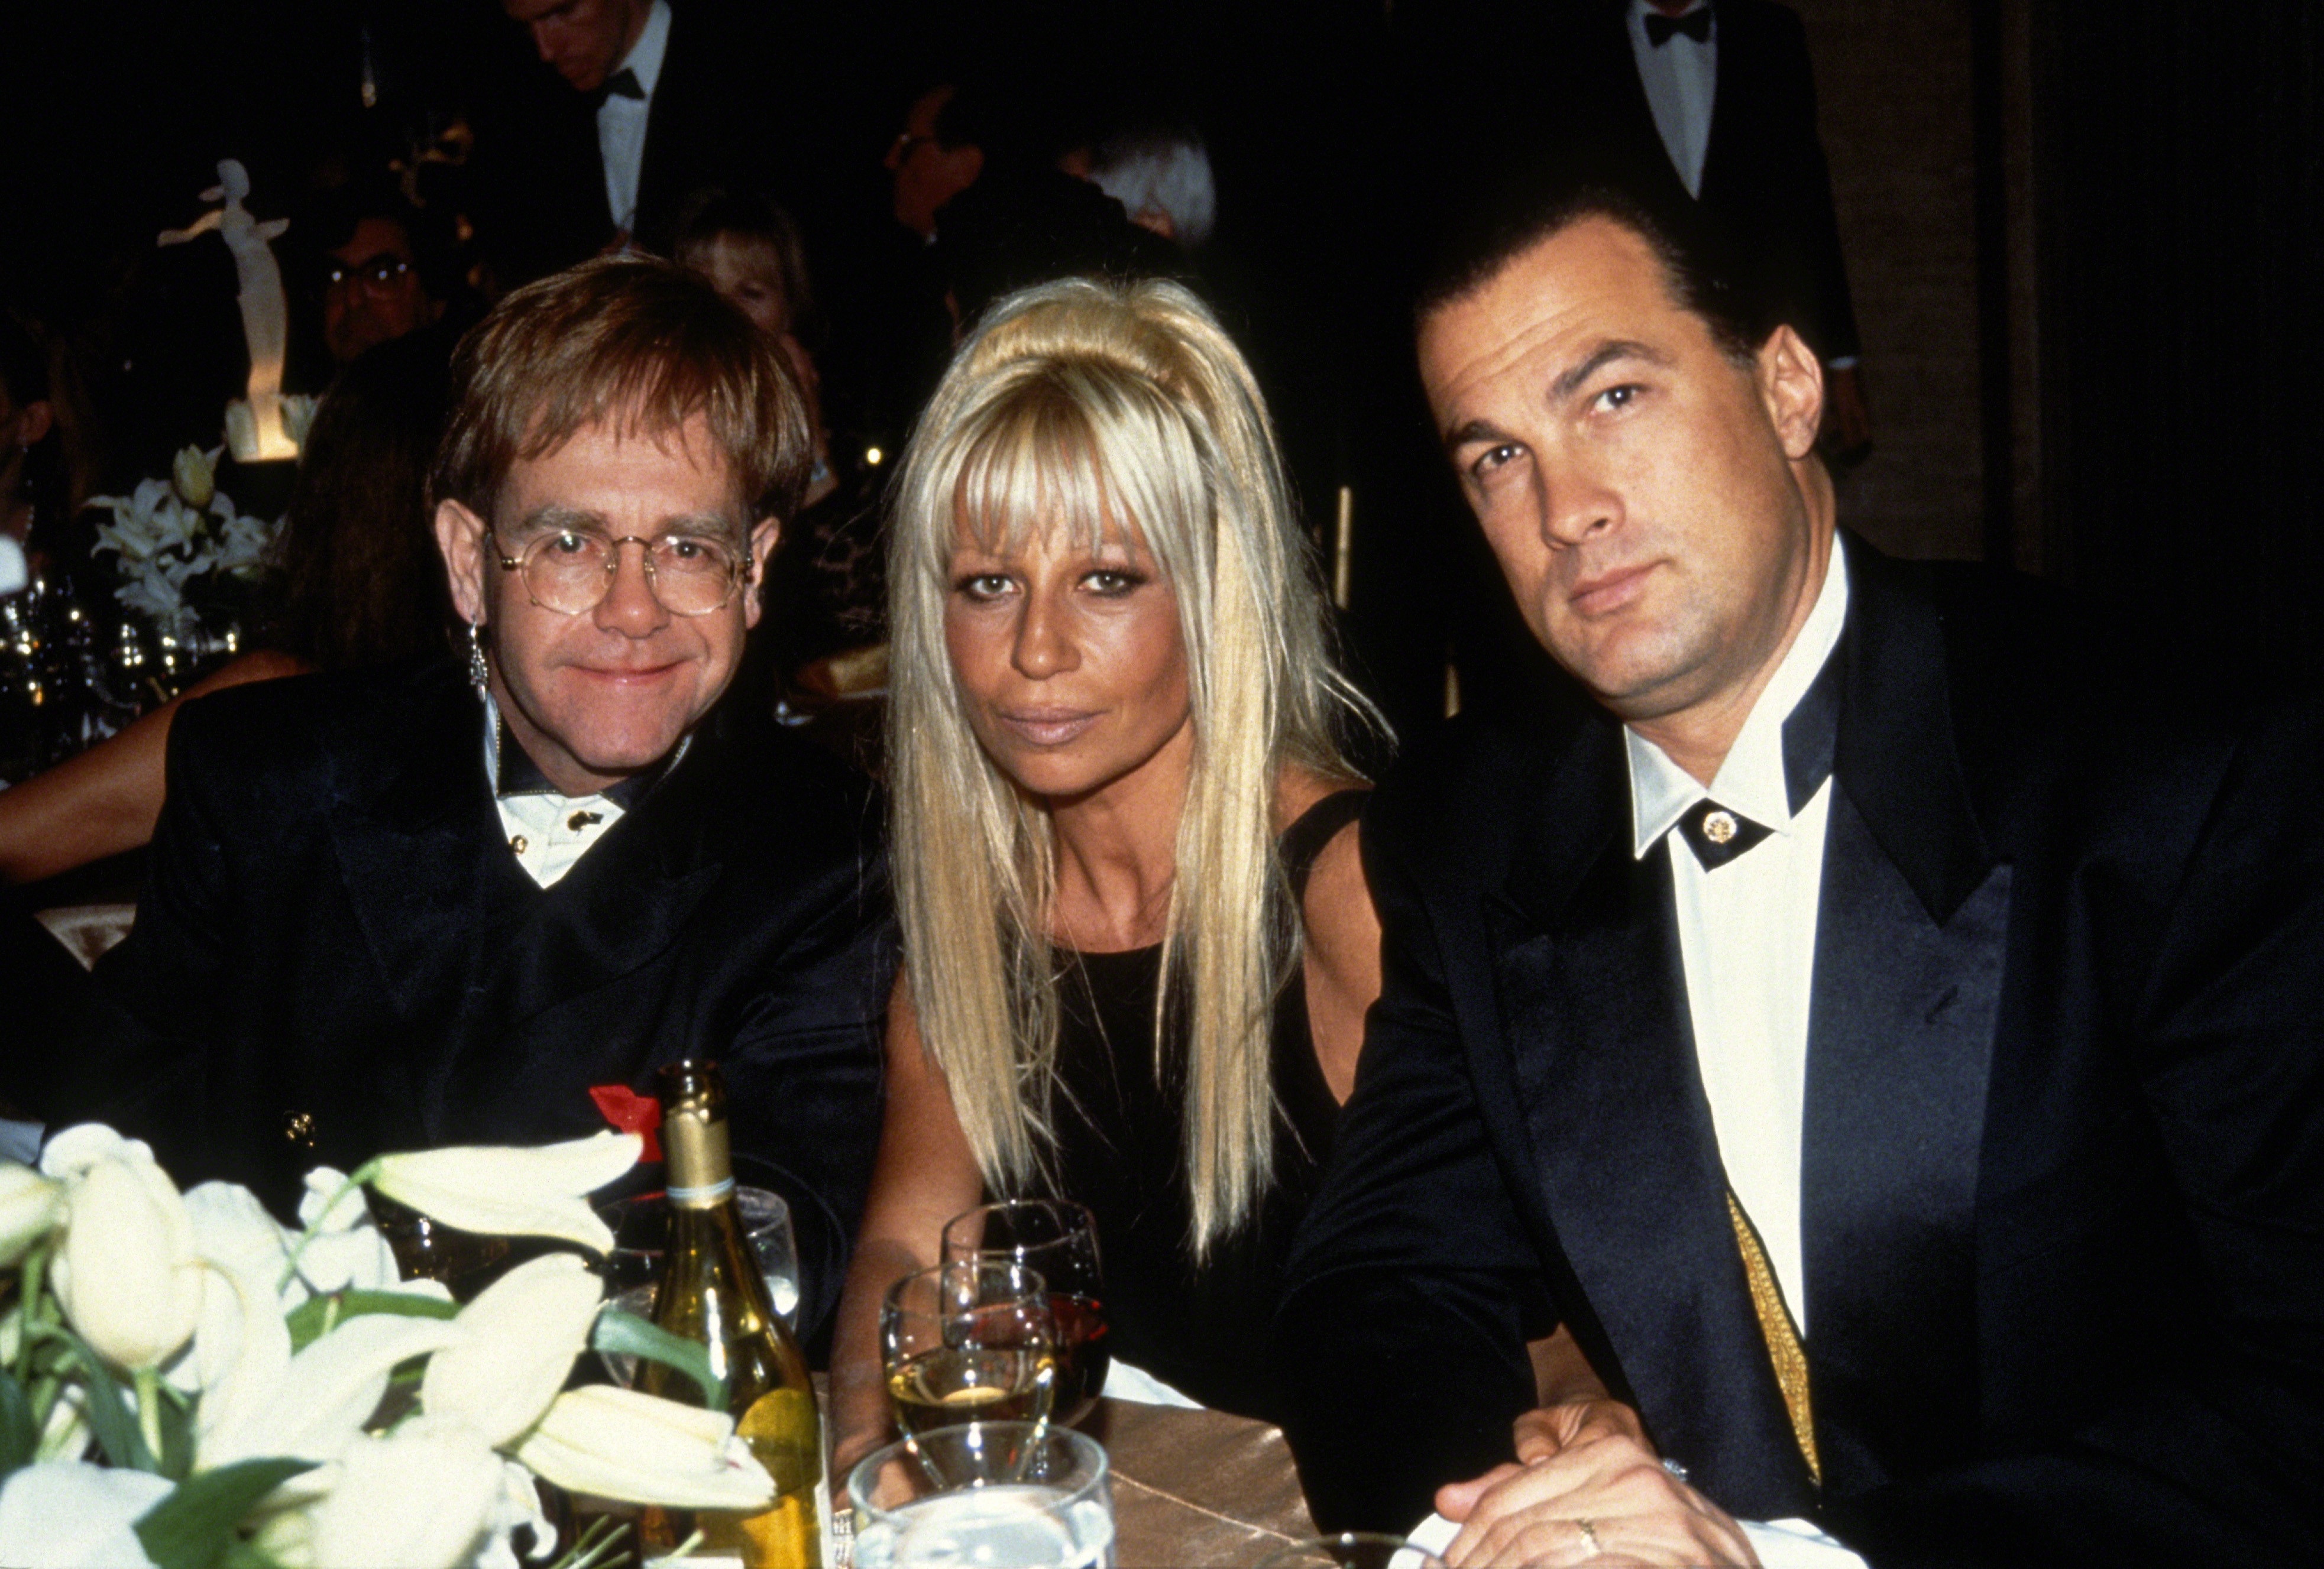 Elton John, Donatella Versace and Steven Seagal attend the 12th Annual Council of Fashion Designers of America (CFDA) Awards, circa 1993 in New York City | Source: Getty Images